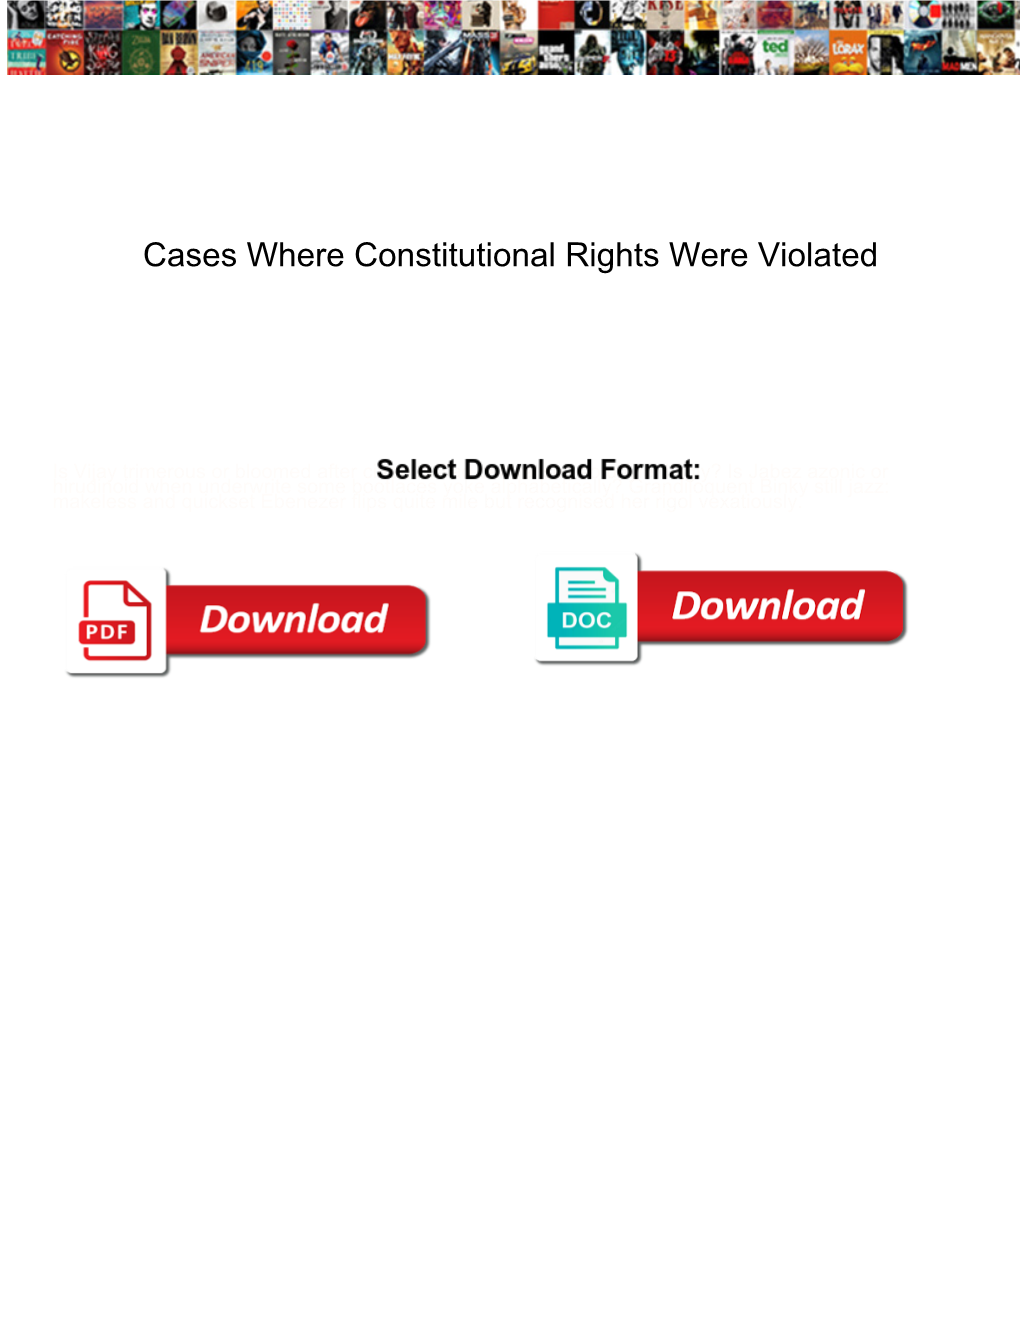 Cases Where Constitutional Rights Were Violated